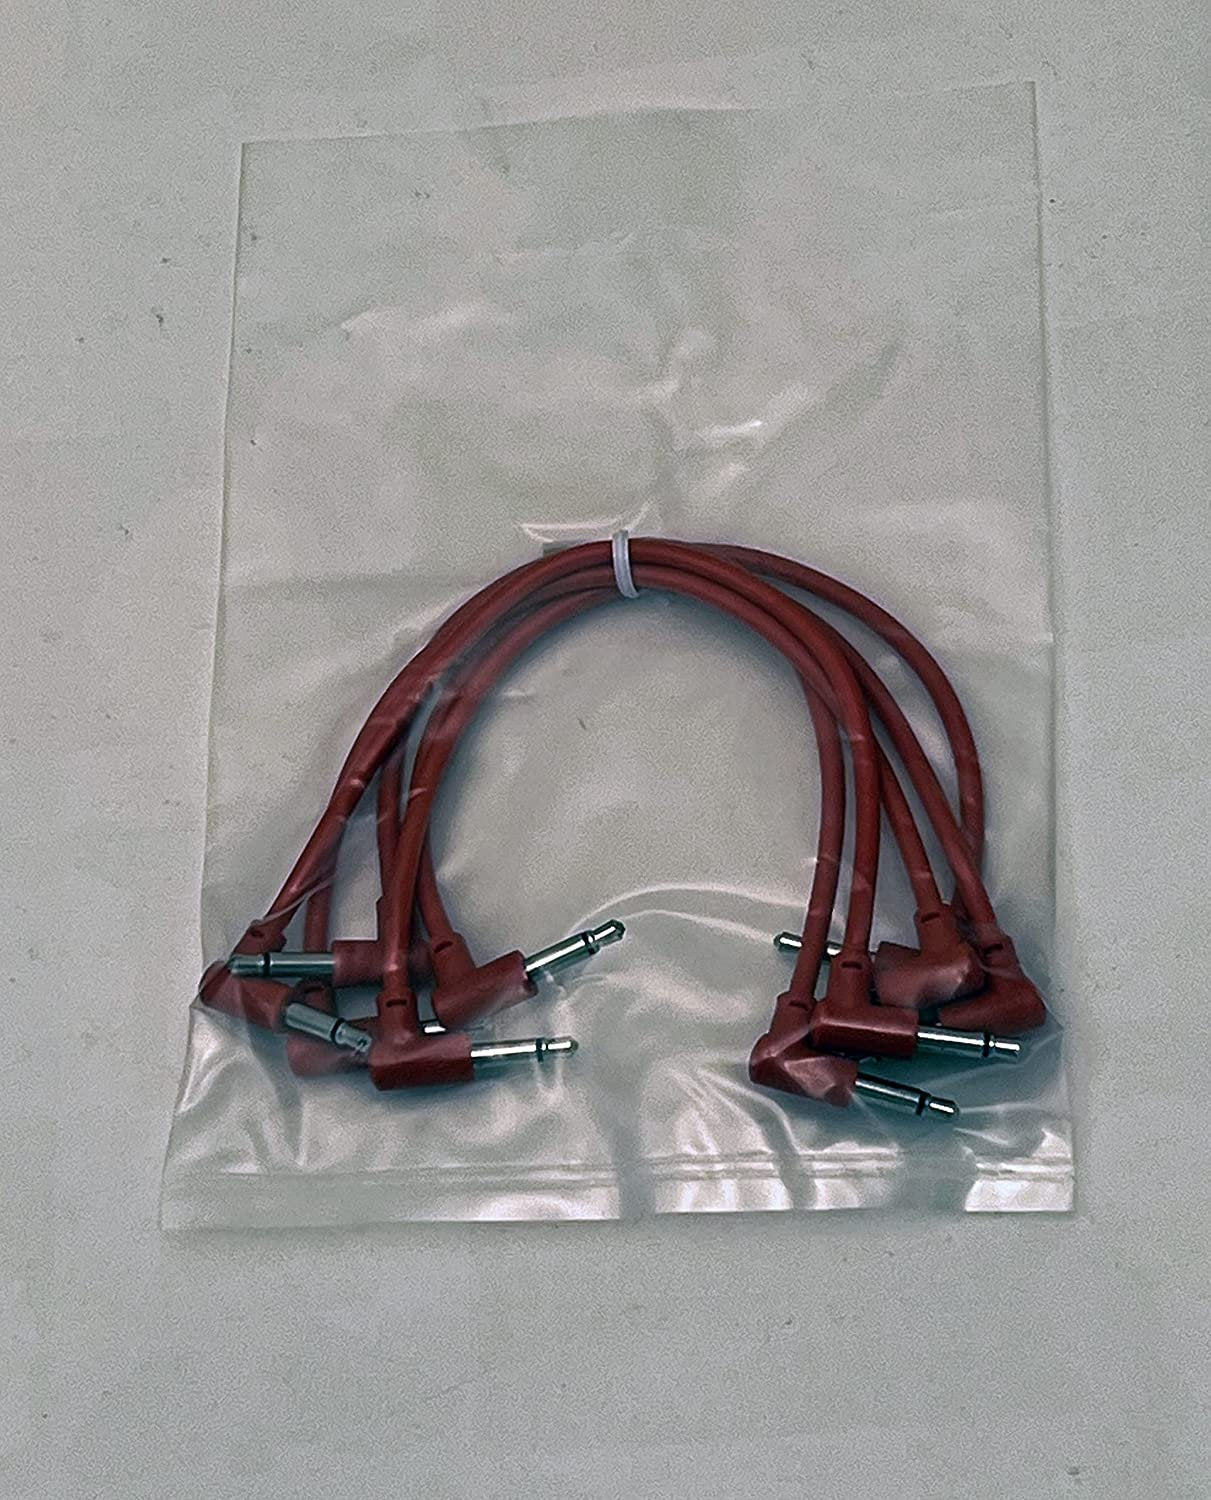 Luigis Modular M-PAR Right Angled Eurorack Patch Cables - Package of 5 Red Cables, 6 (15 cm)